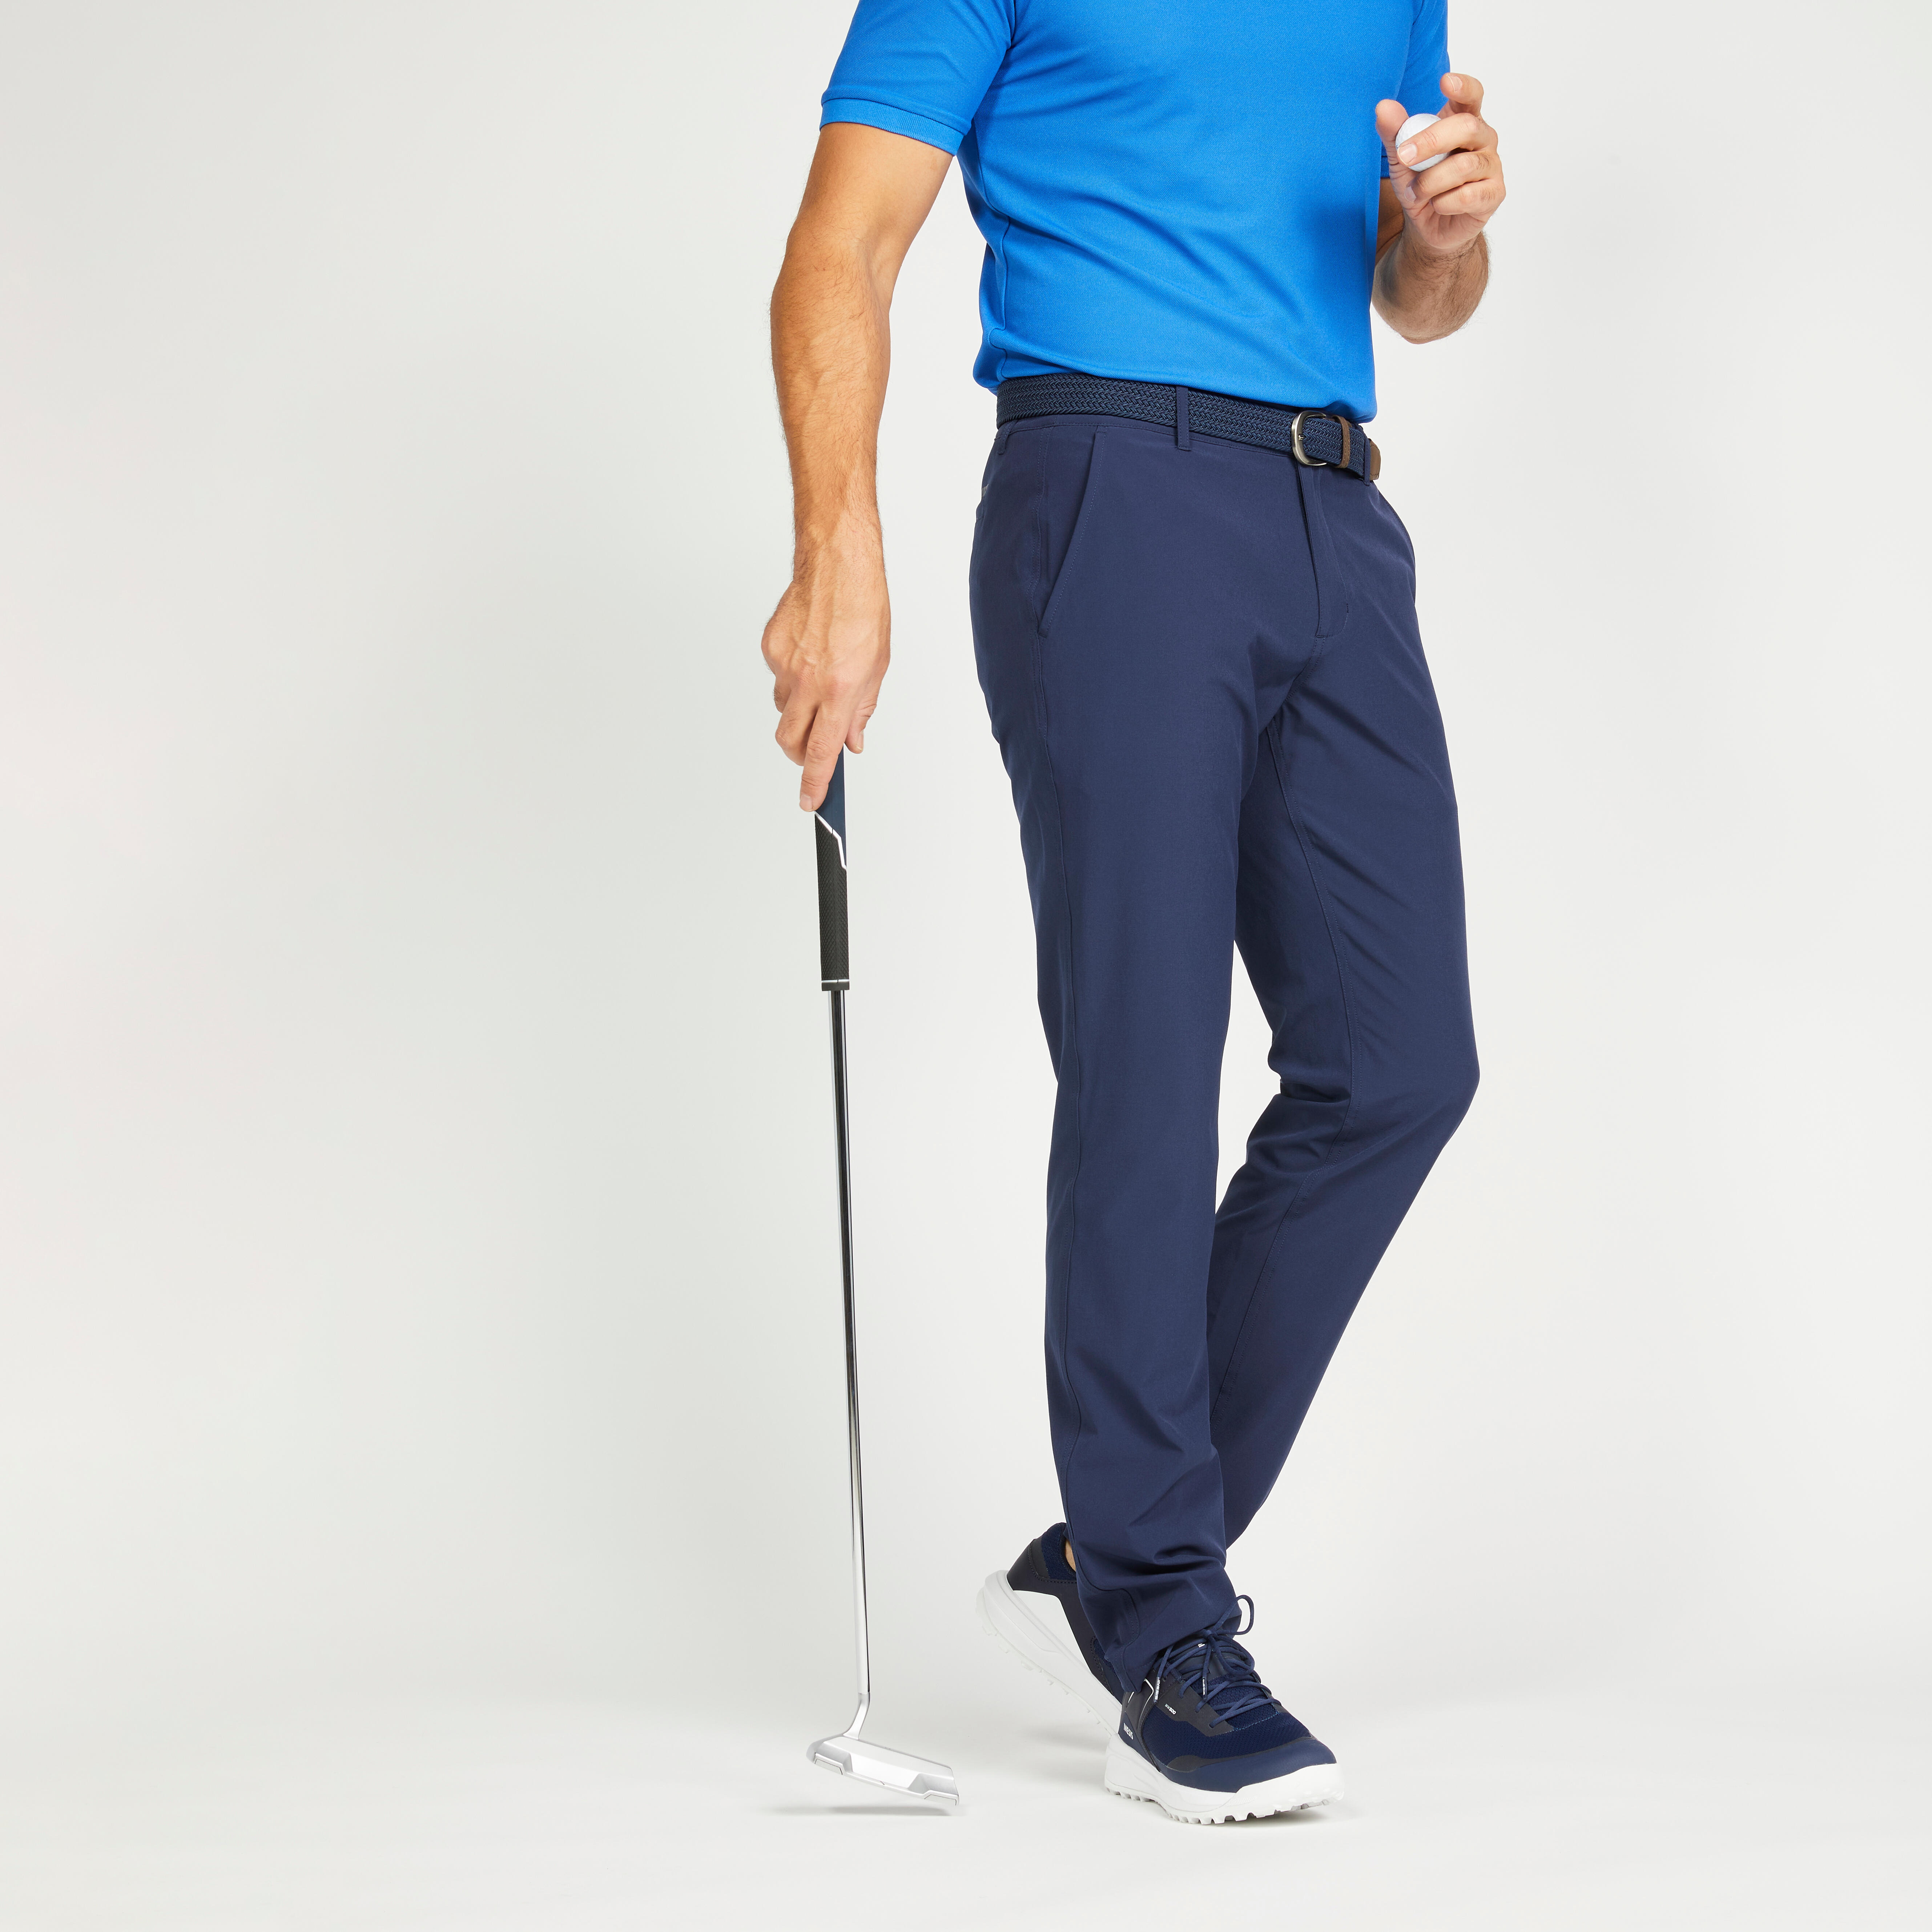 Inesis 8516695 Men's Golf Trousers, UK39 FR48 (L34) (Blue) : Amazon.in:  Clothing & Accessories